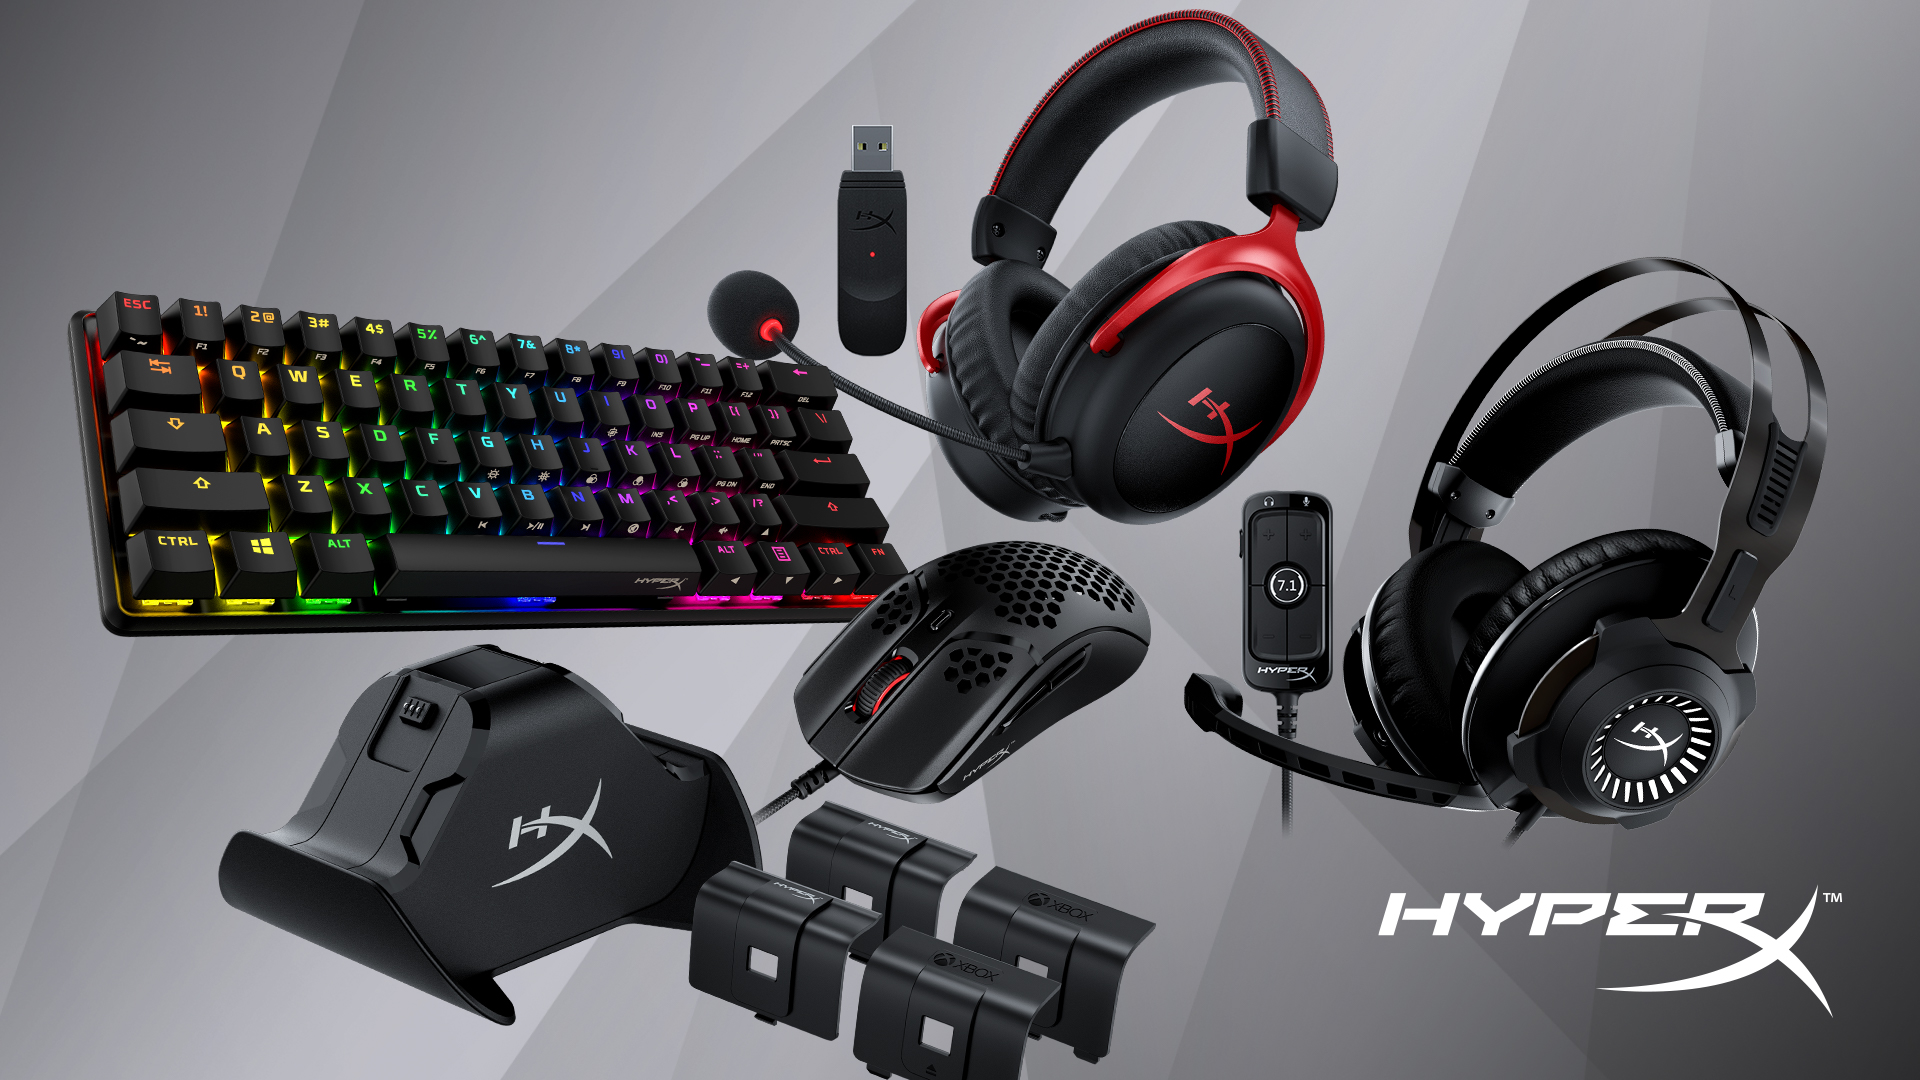 HyperX reveals all-new PC and console gaming gear at CES 2021